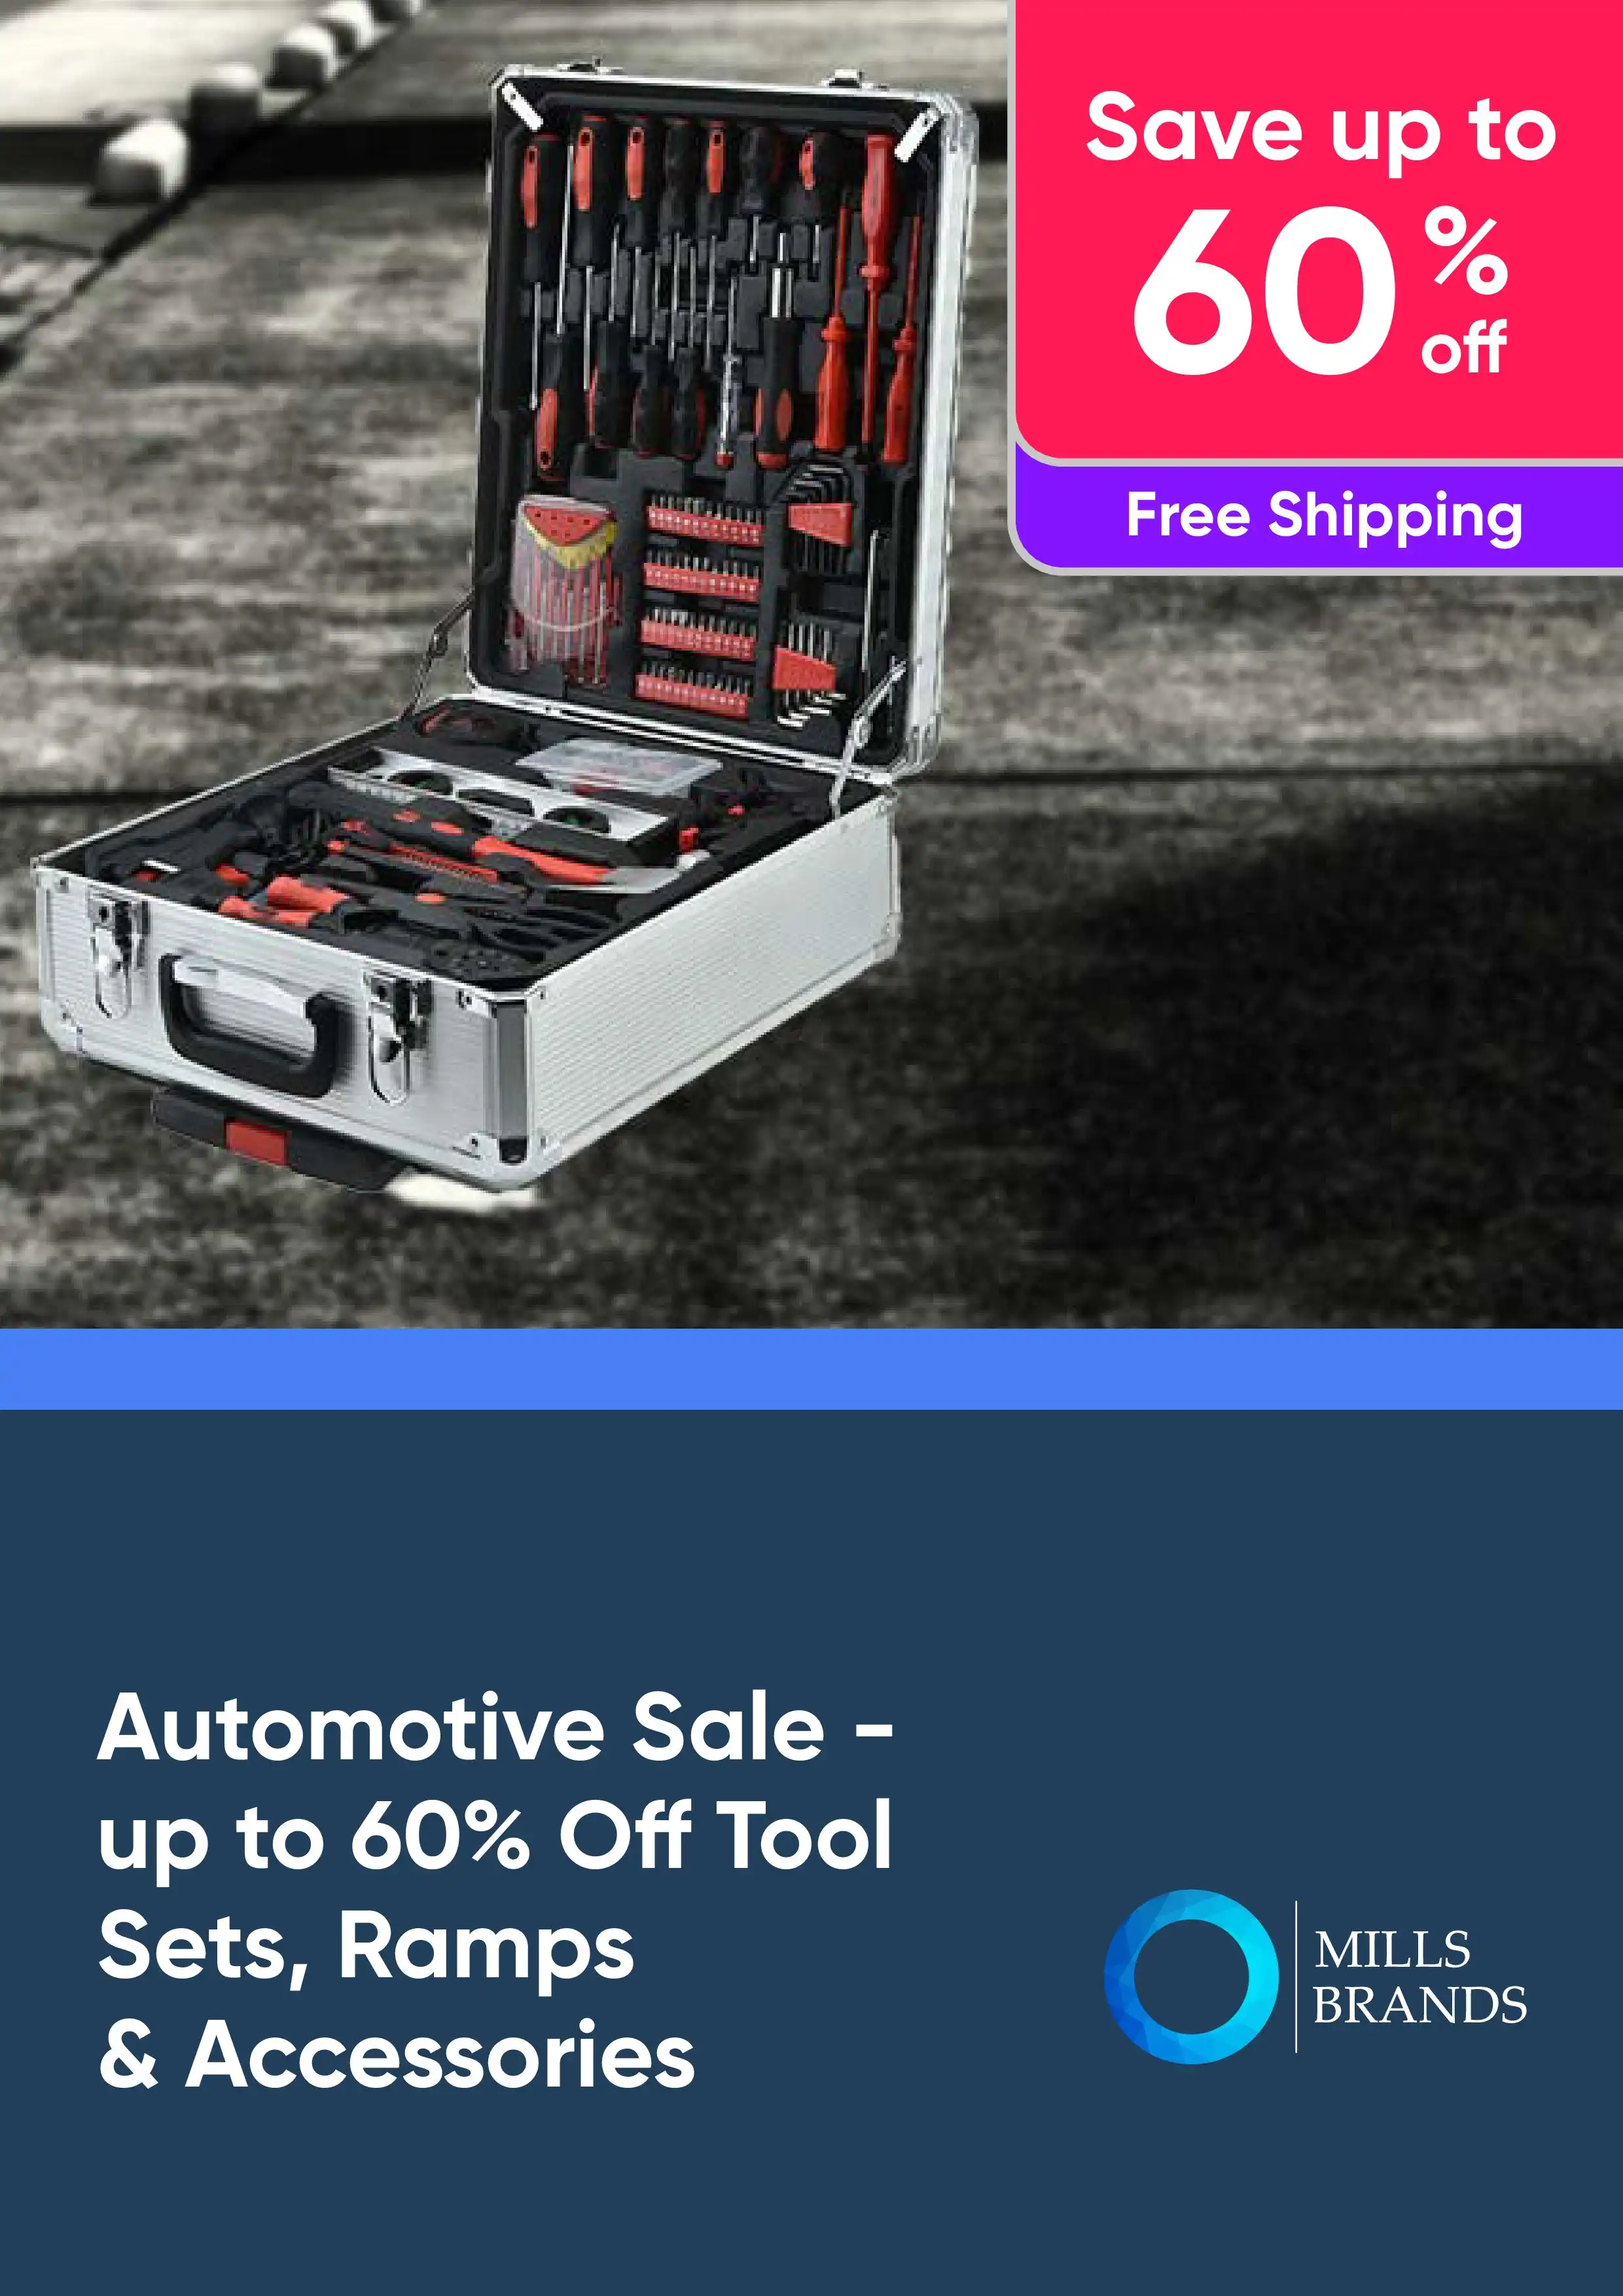 Automotive Sale up to 60% Off Tools sets, Ramps & accessories